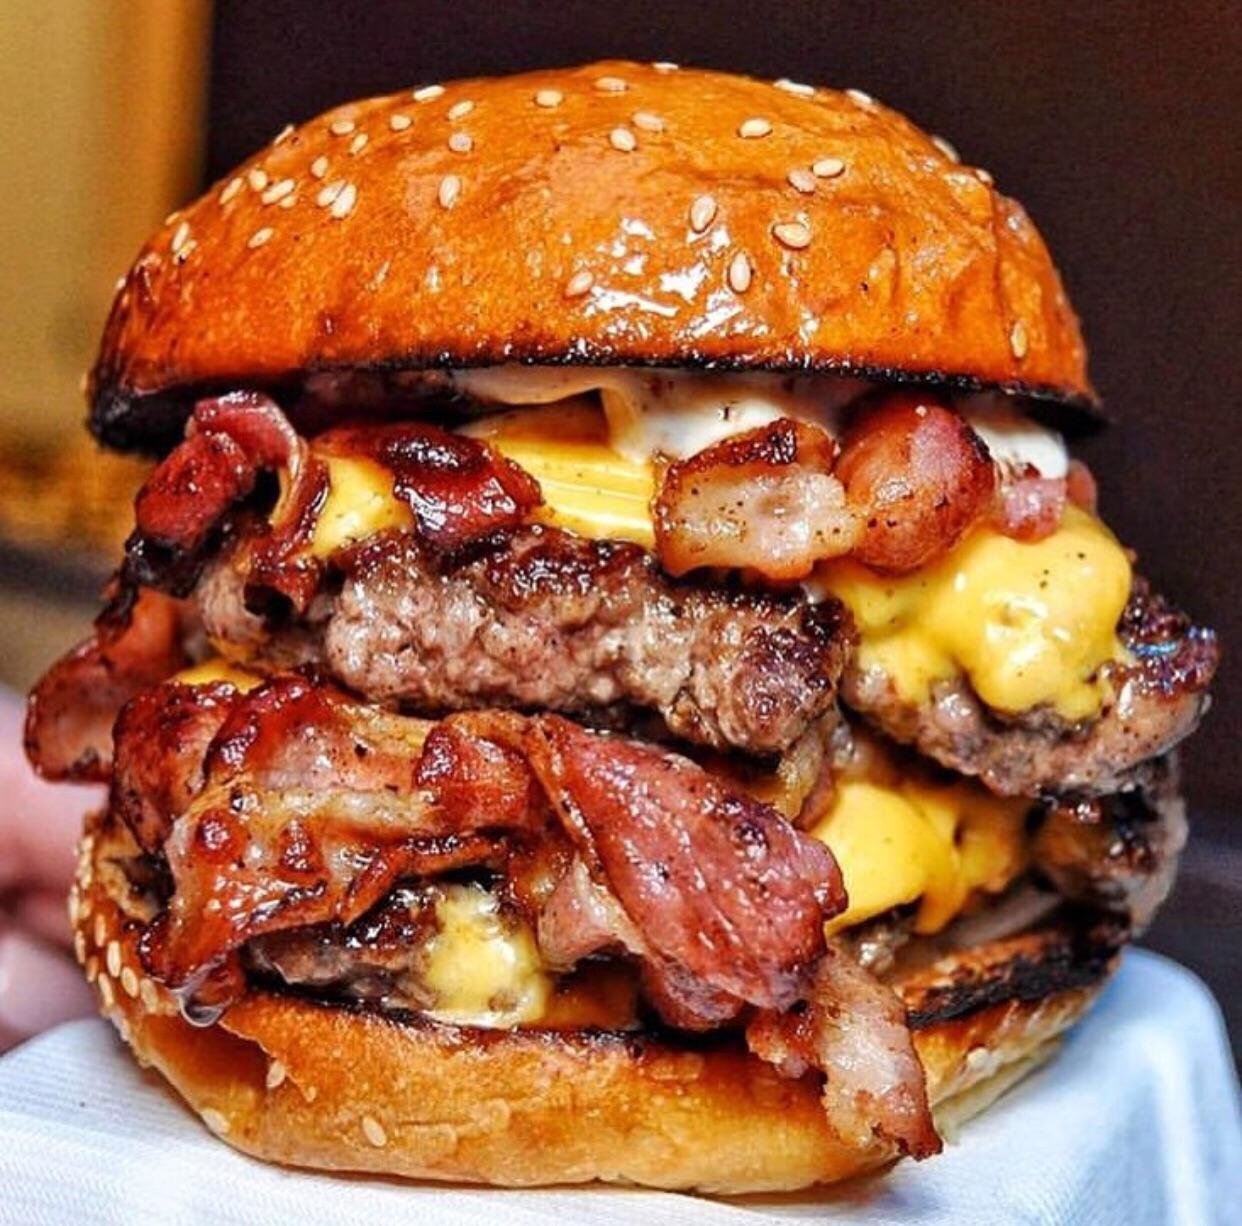 Fat Food Porn - The Fat Boy Diet â€” food-porn-diary: Who has the best burger in your...